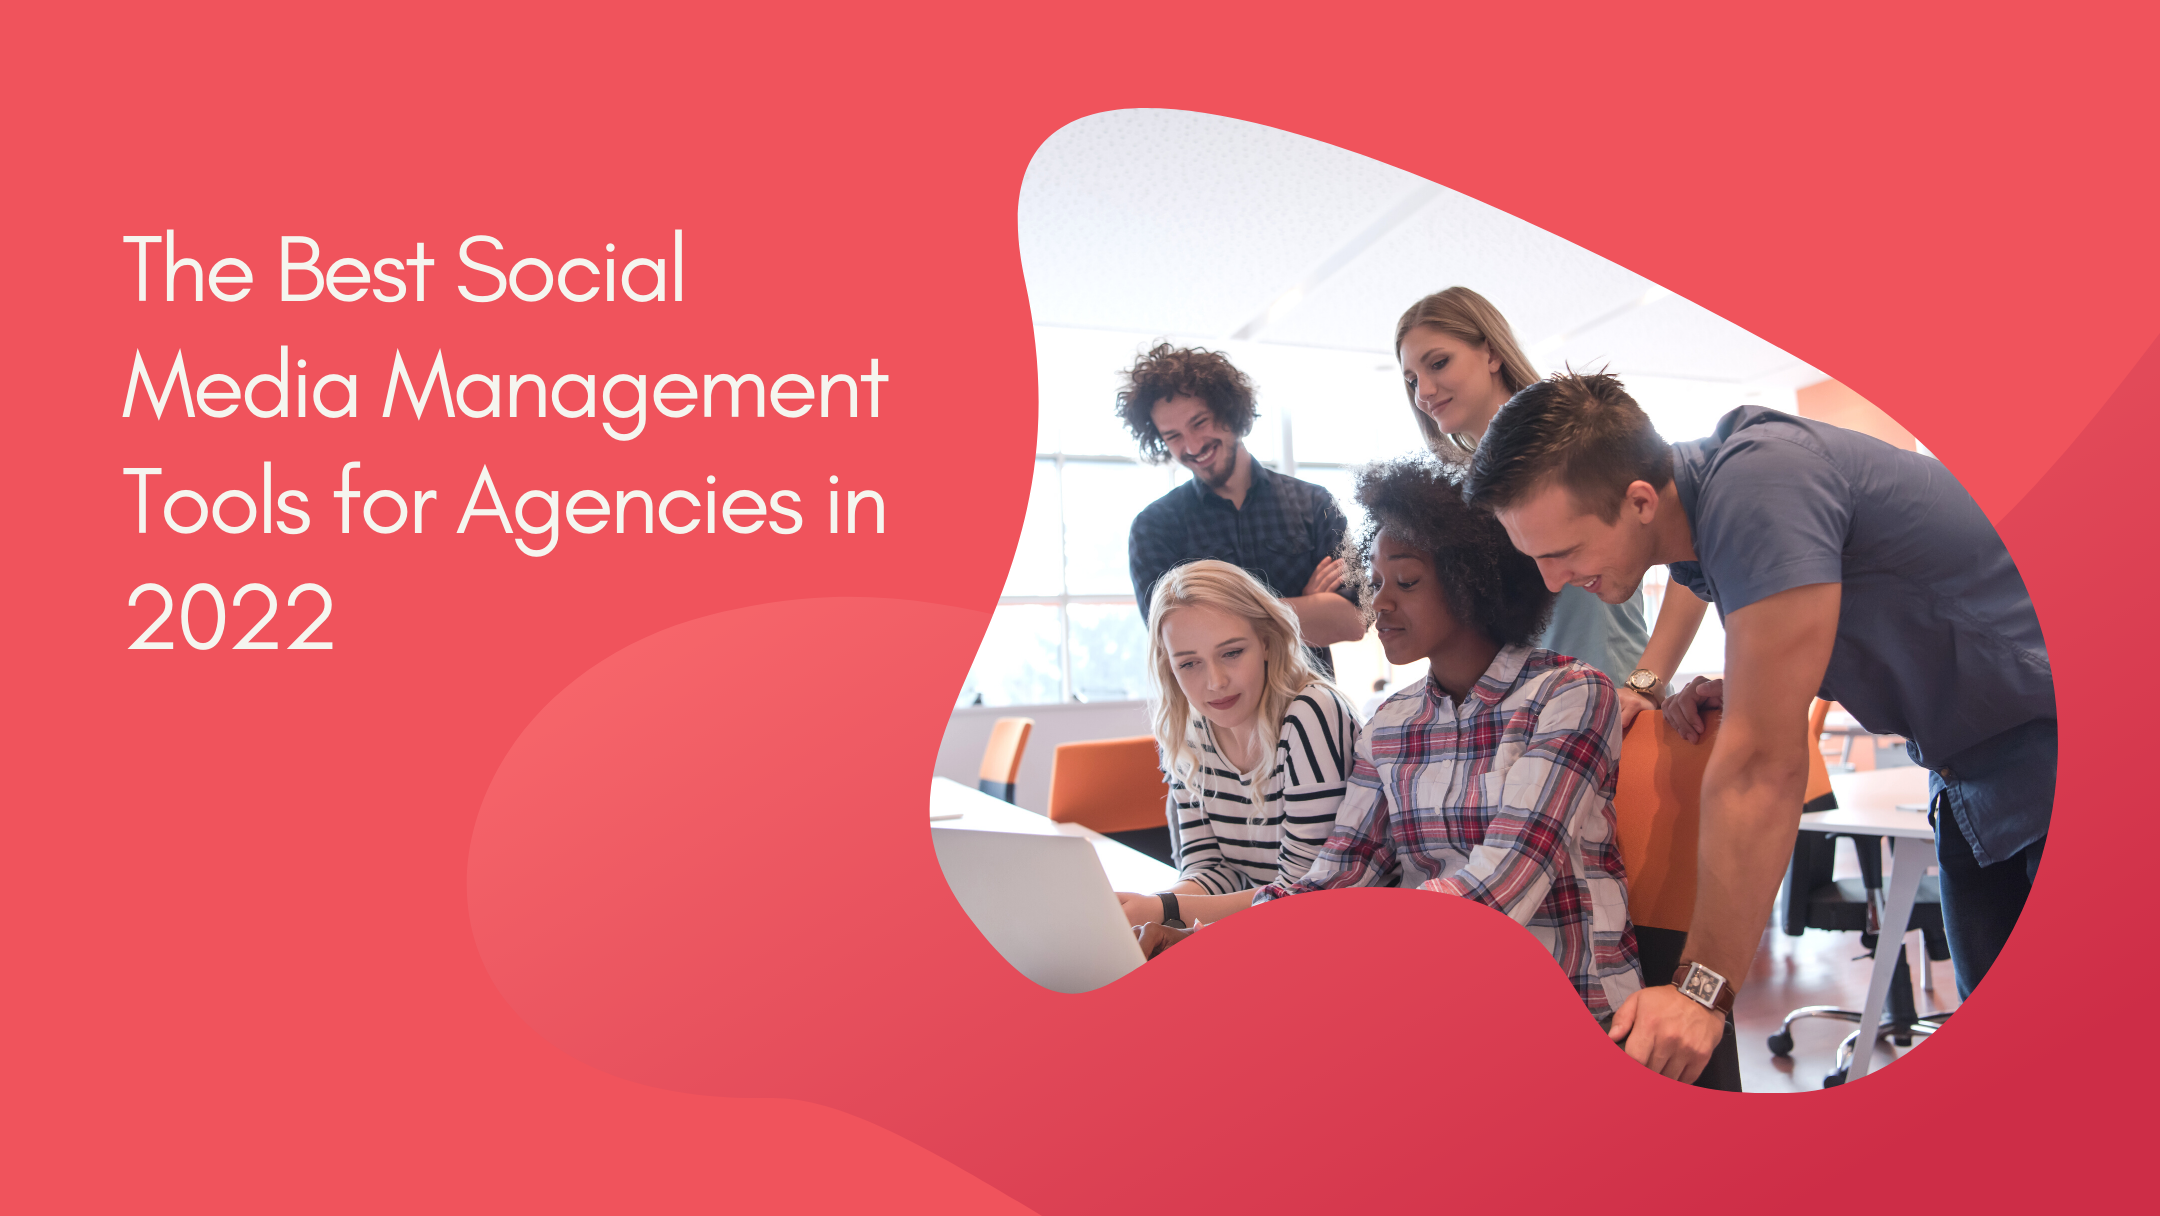 AgencyVista_the-best-social-media-management-tools-for-agencies-in-2022 (2)